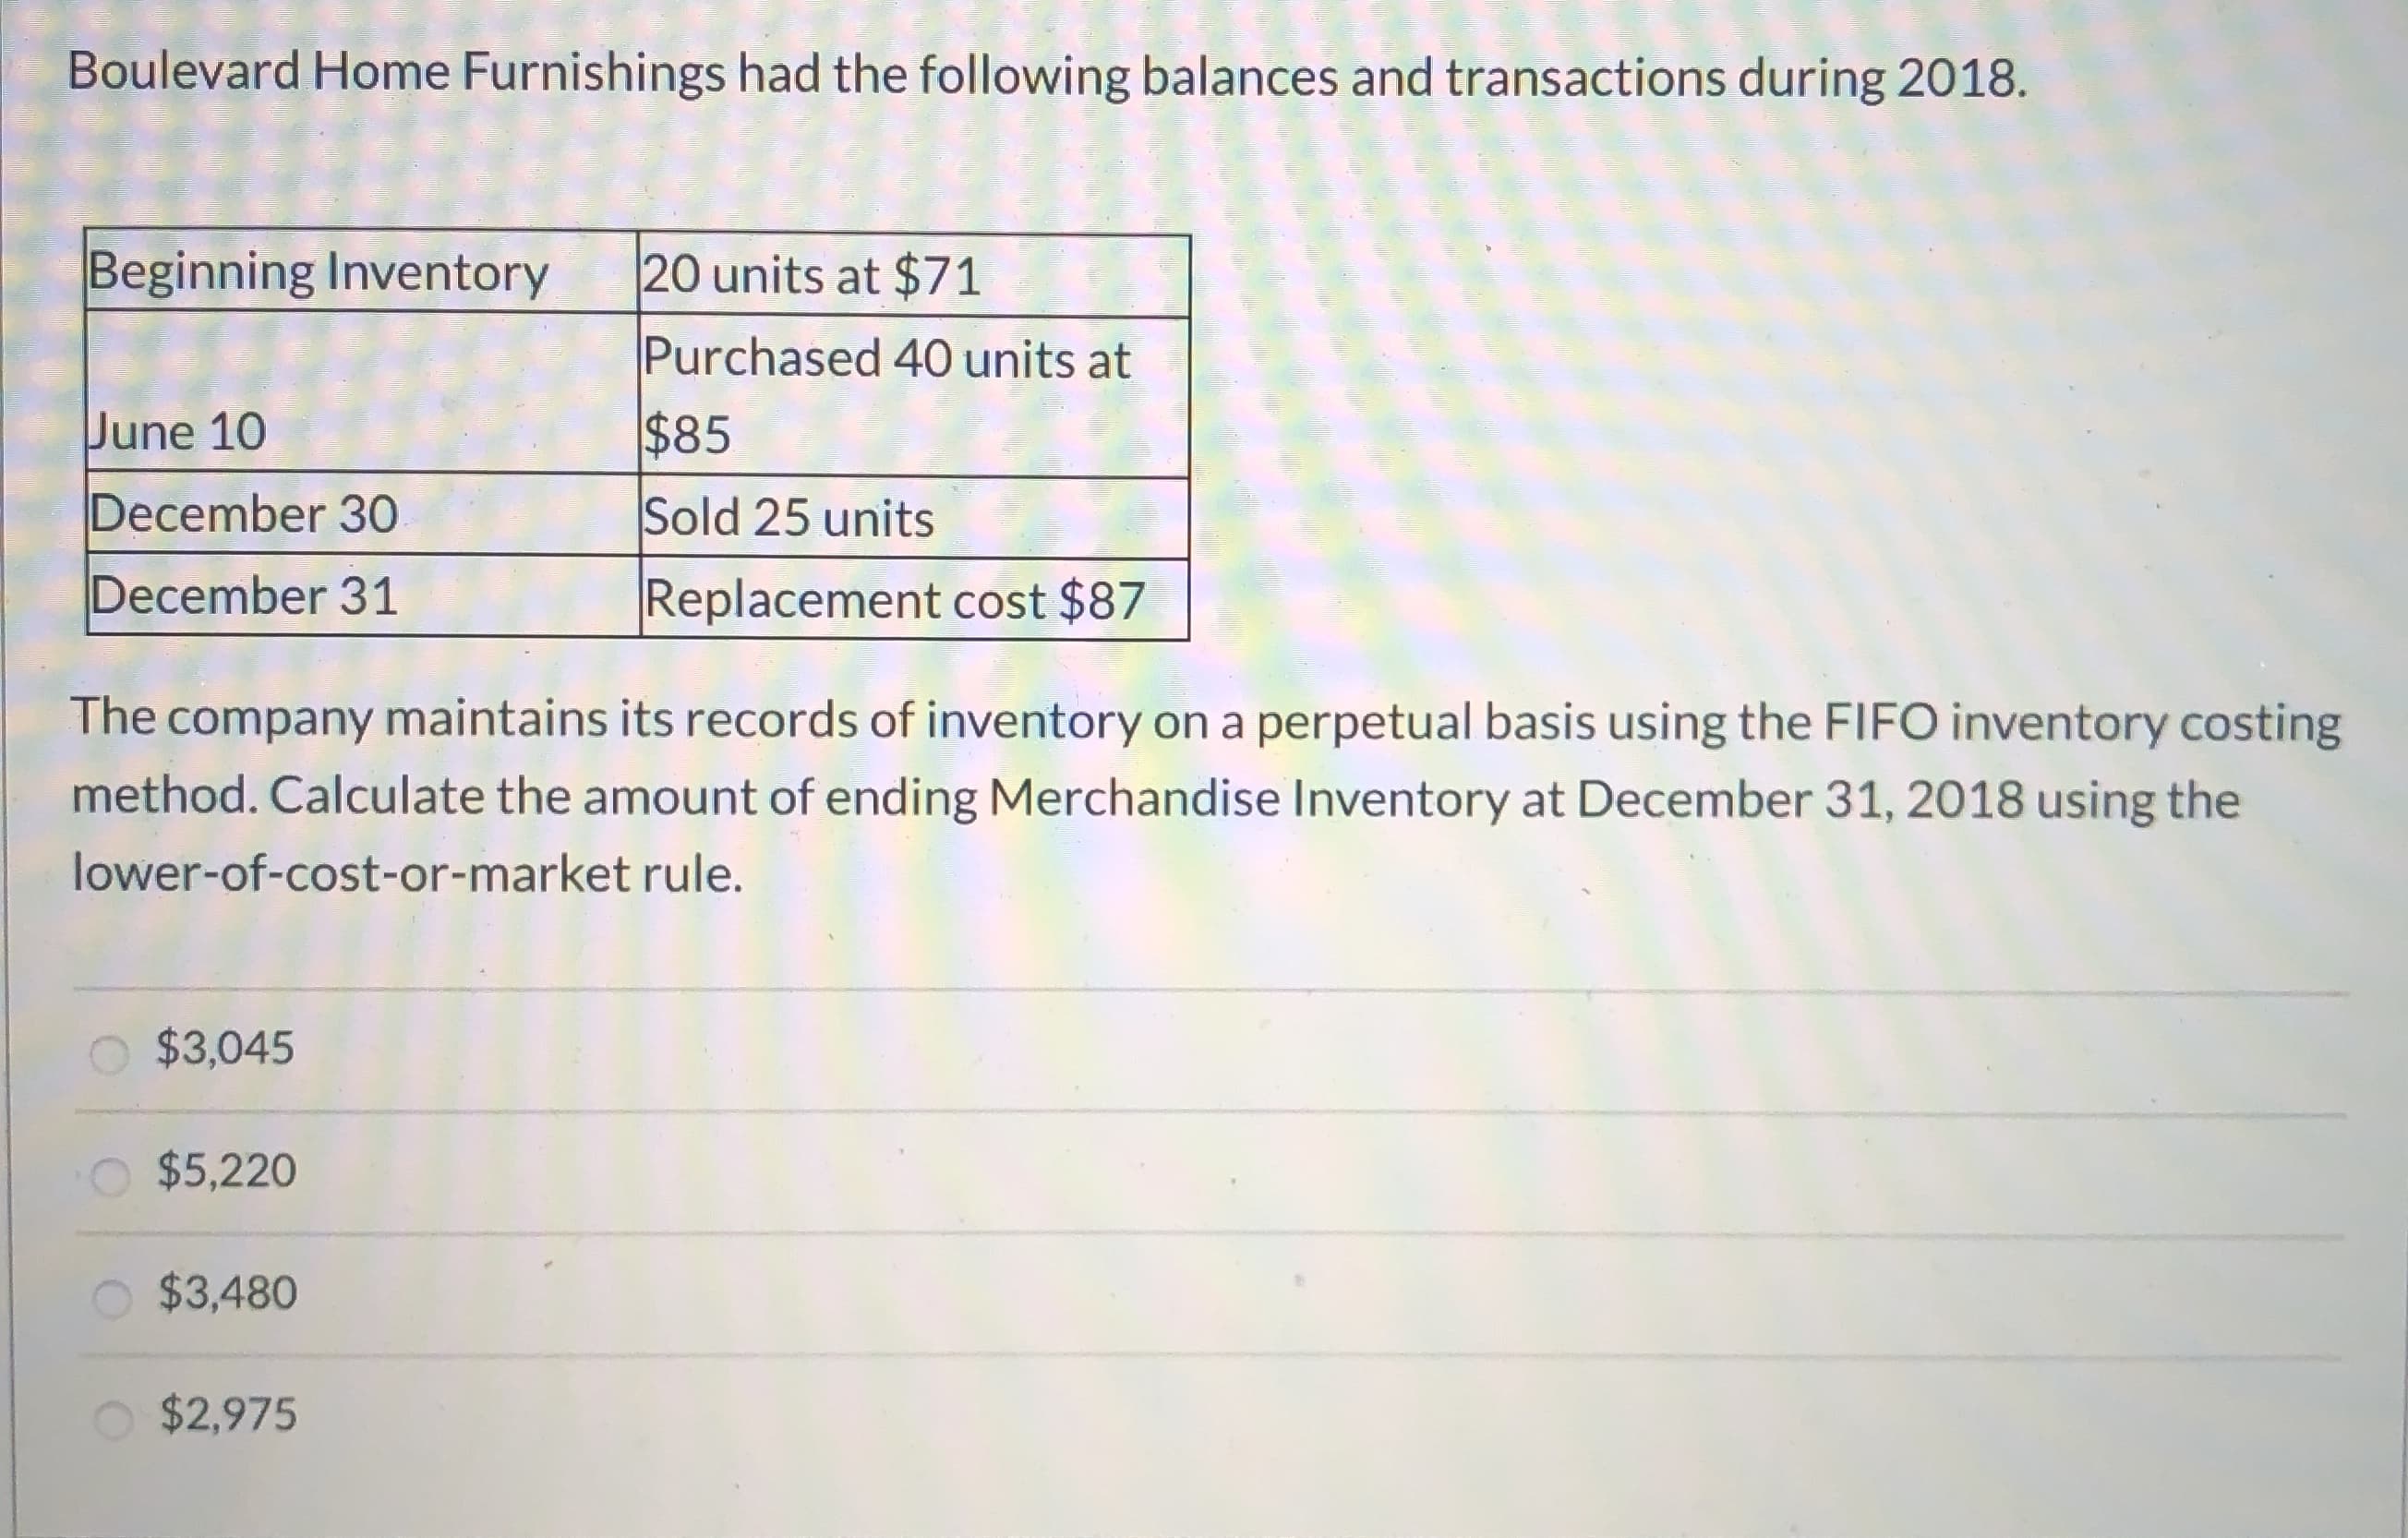 Boulevard Home Furnishings had the following balances and transactions during 2018.
Beginning Inventory
20 units at $71
Purchased 40 units at
June 10
$85
December 30
Sold 25 units
December 31
Replacement cost $87
The company maintains its records of inventory on a perpetual basis using the FIFO inventory costing
method. Calculate the amount of ending Merchandise Inventory at December 31, 2018 using the
lower-of-cost-or-market rule.
$3,045
$5,220
$3,480
$2,975
